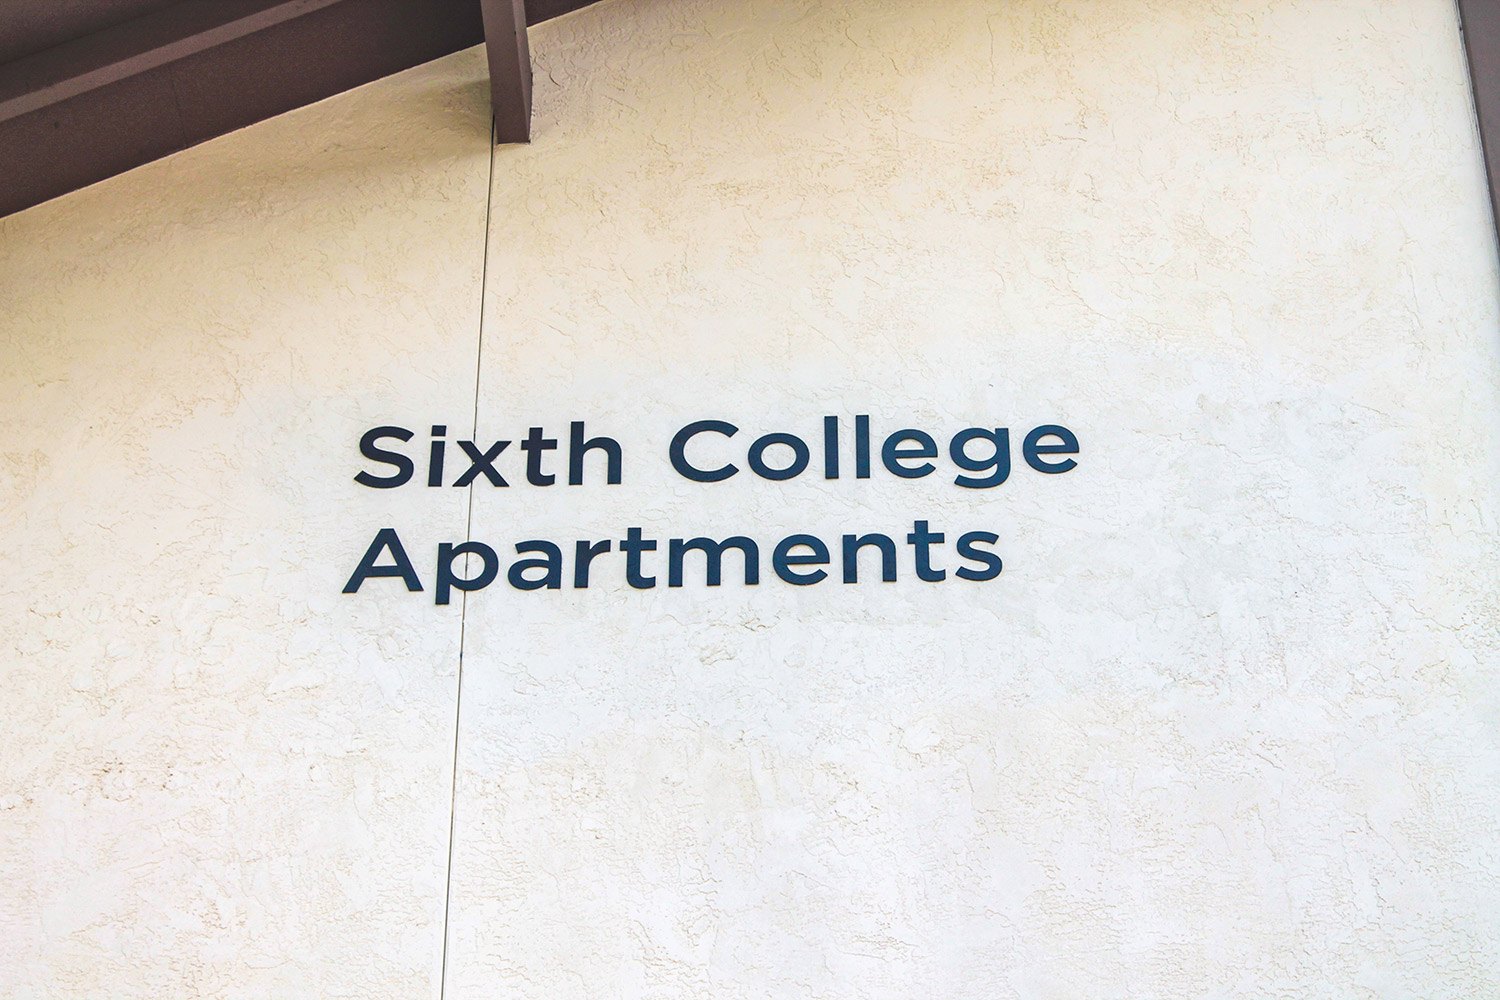 300-UCSD-Sixt-College-Apartments